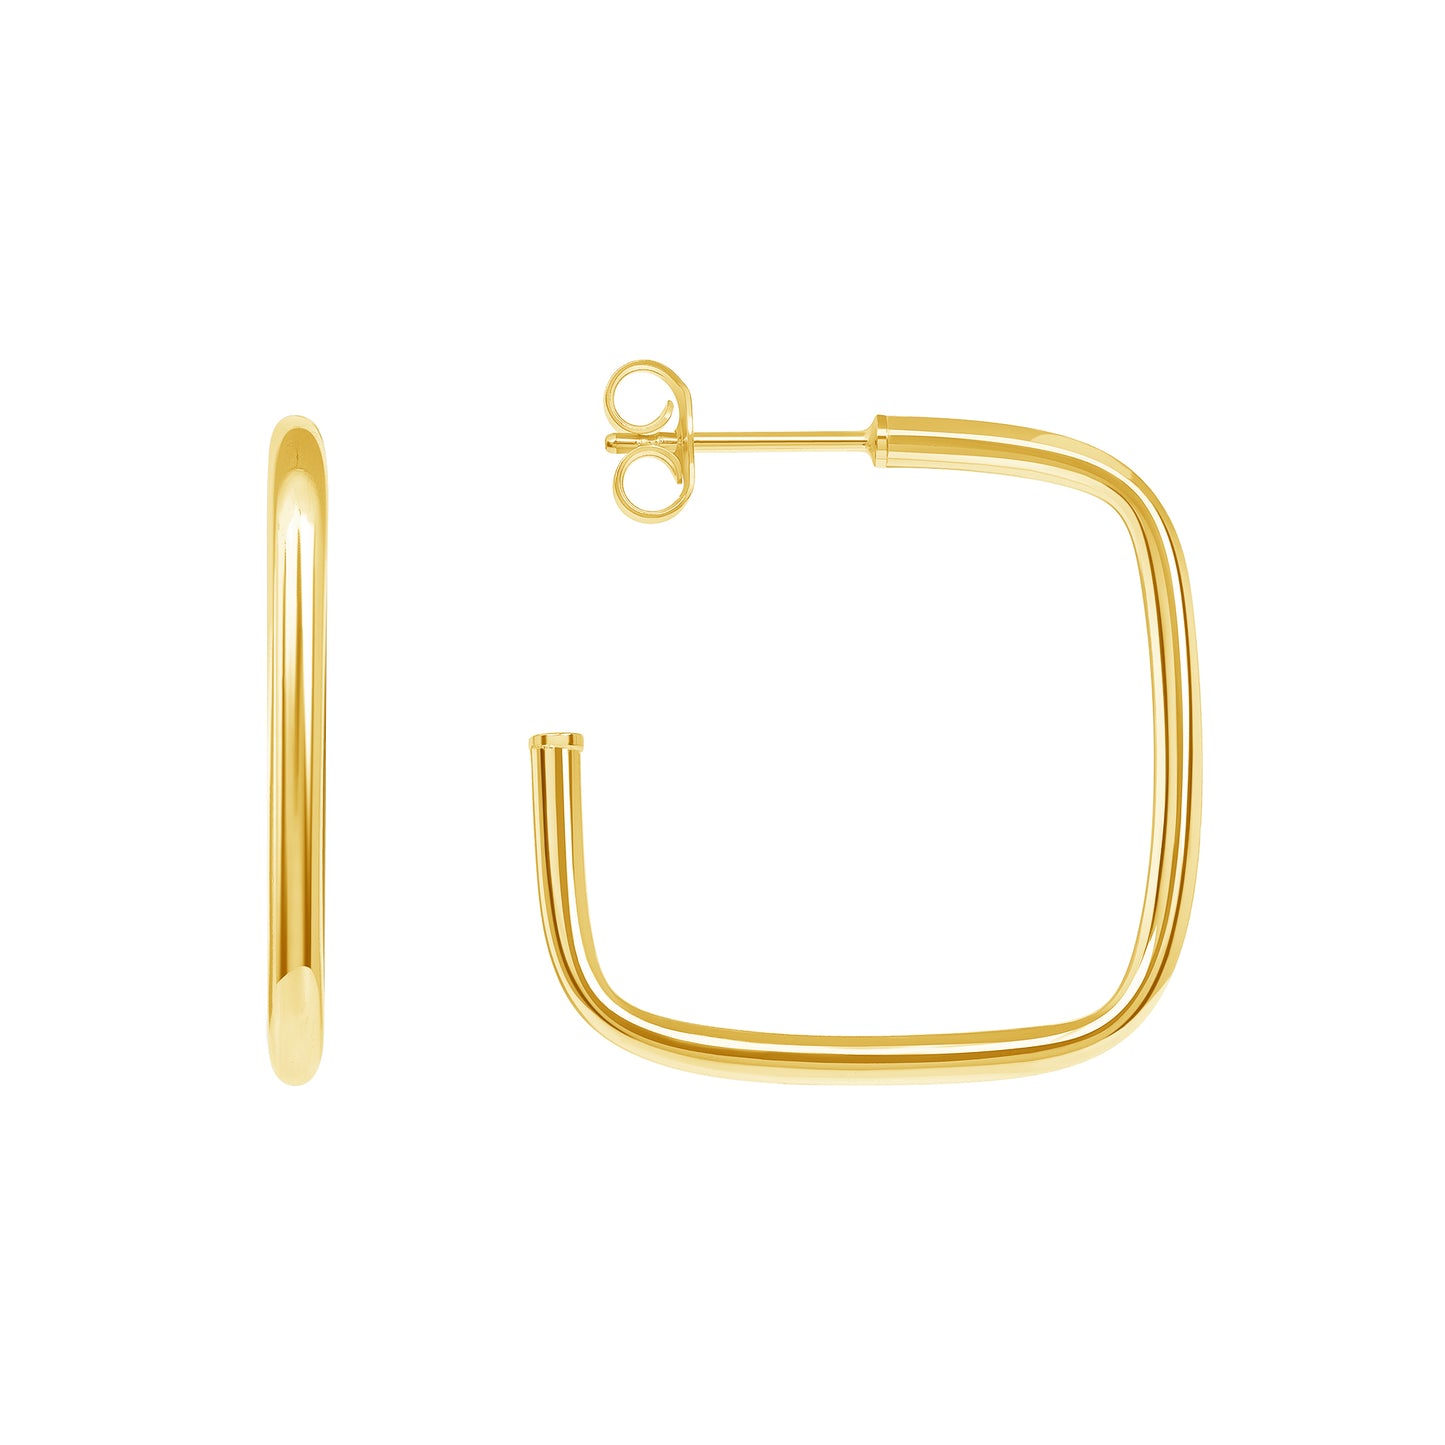 Silver 925 Gold Plated 2mm / 25 mm Squared Hoop Earring . ITHP148-GP